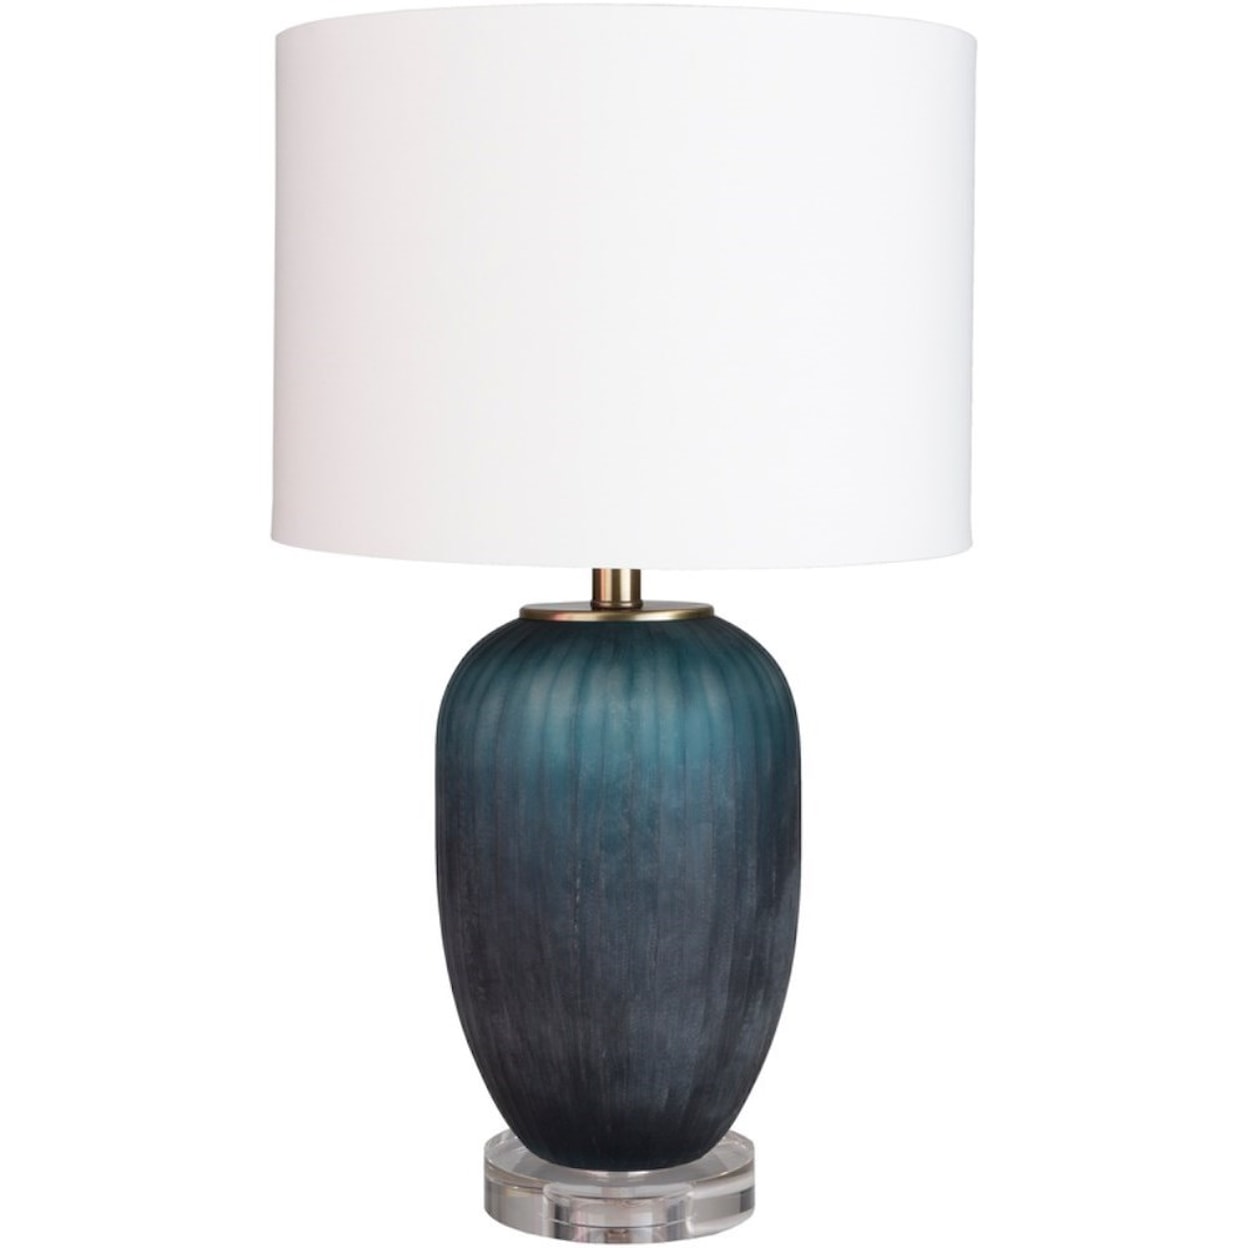 Surya Oliver Table Lamp